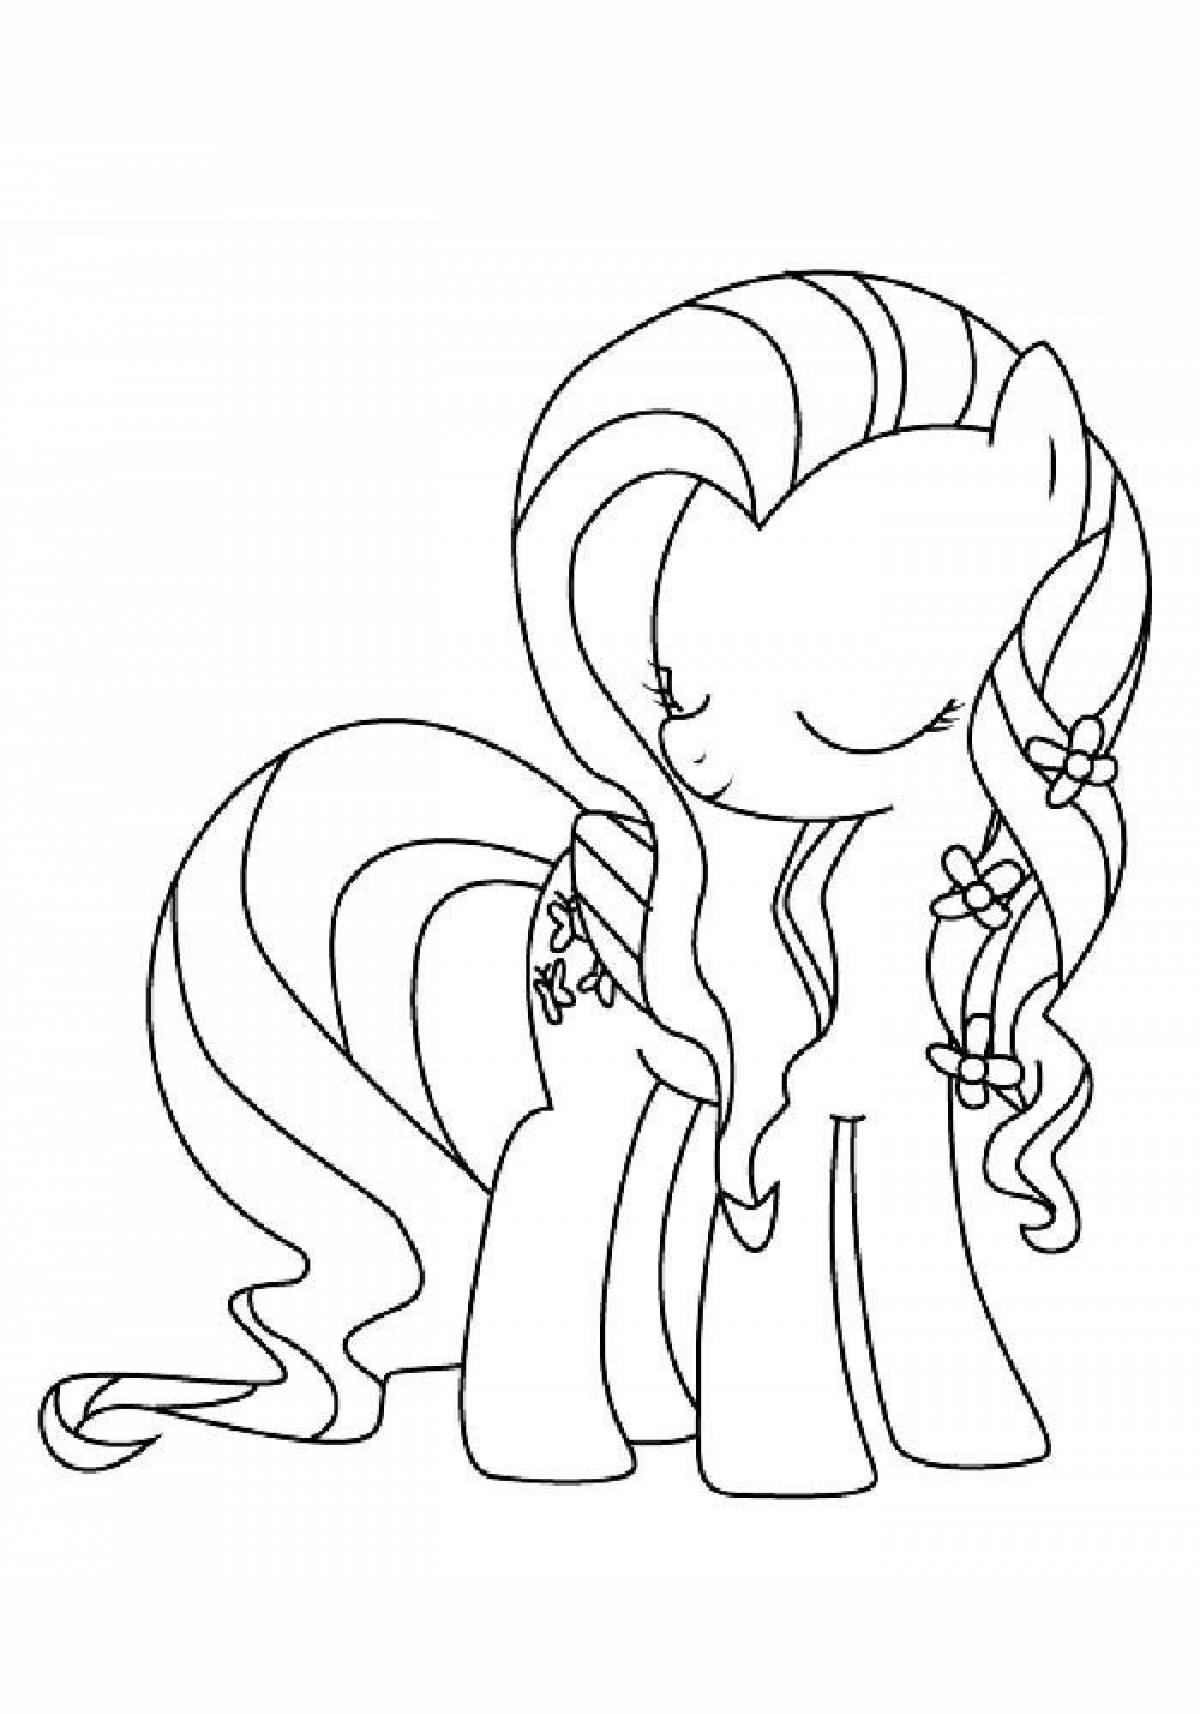 Witty fluttershy coloring book